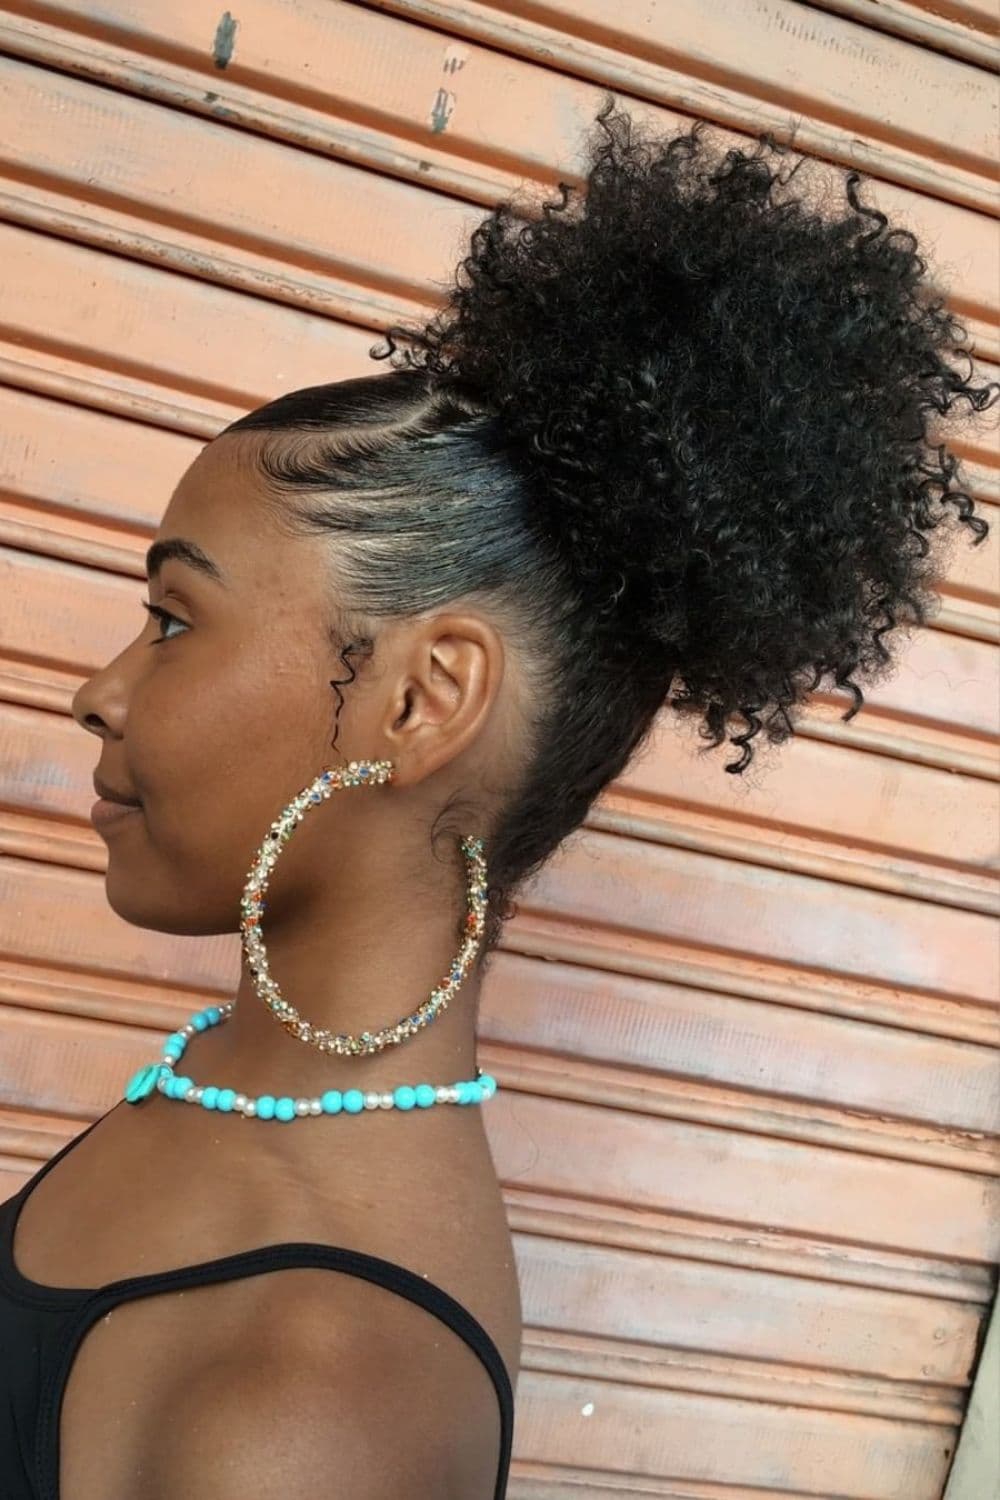 Side view of a woman wearing a big round earring, a beaded necklace, and a black crochet high puff.